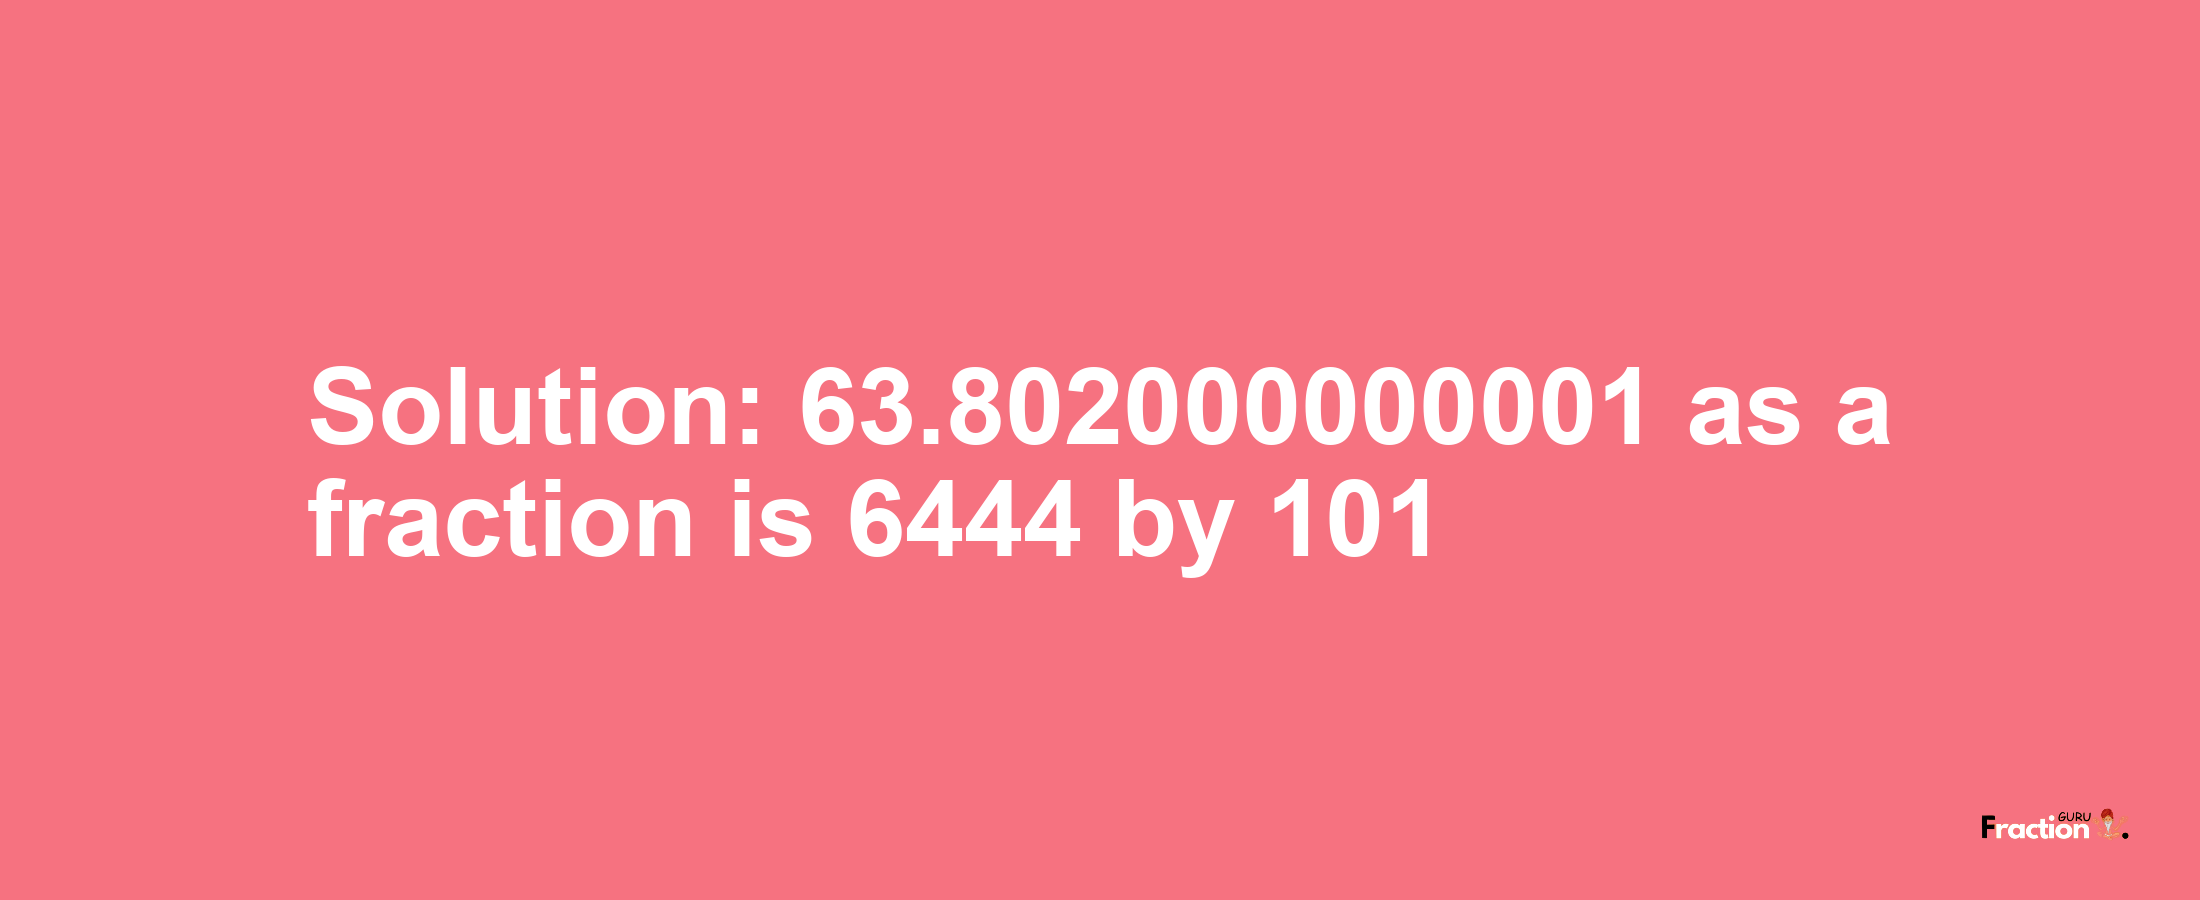 Solution:63.802000000001 as a fraction is 6444/101